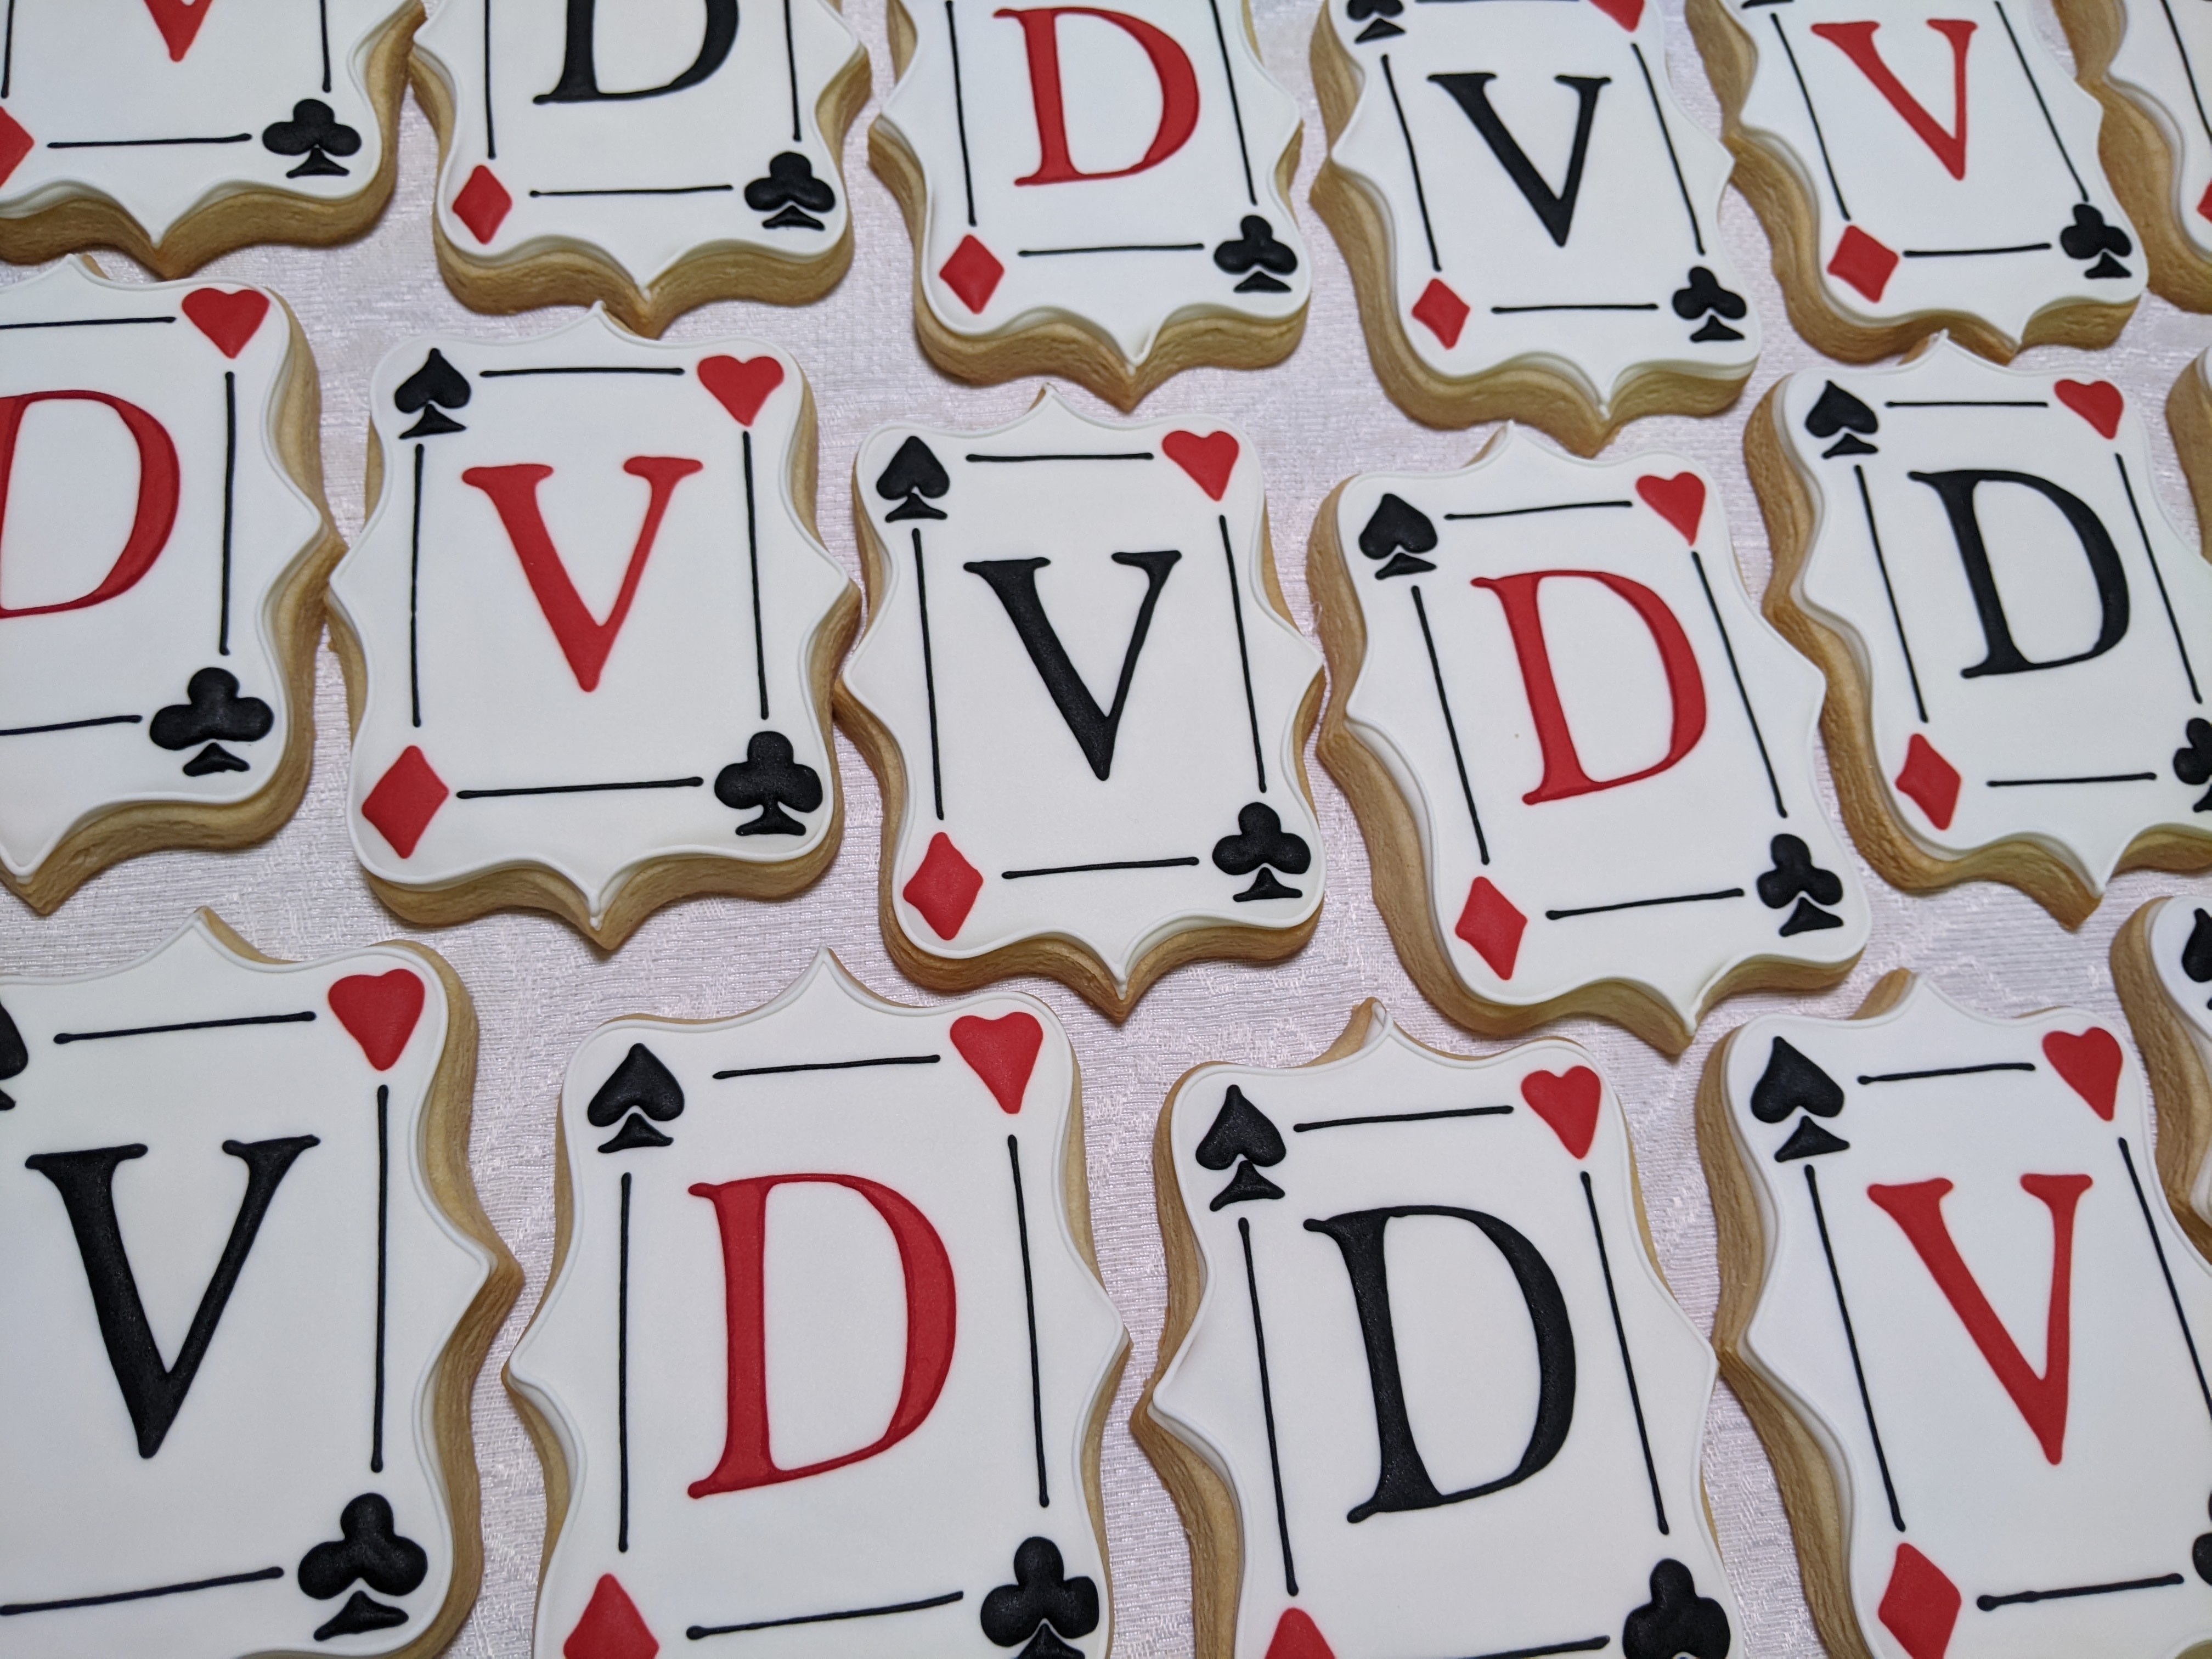 24 Monogram Playing Cards decorated cookies.